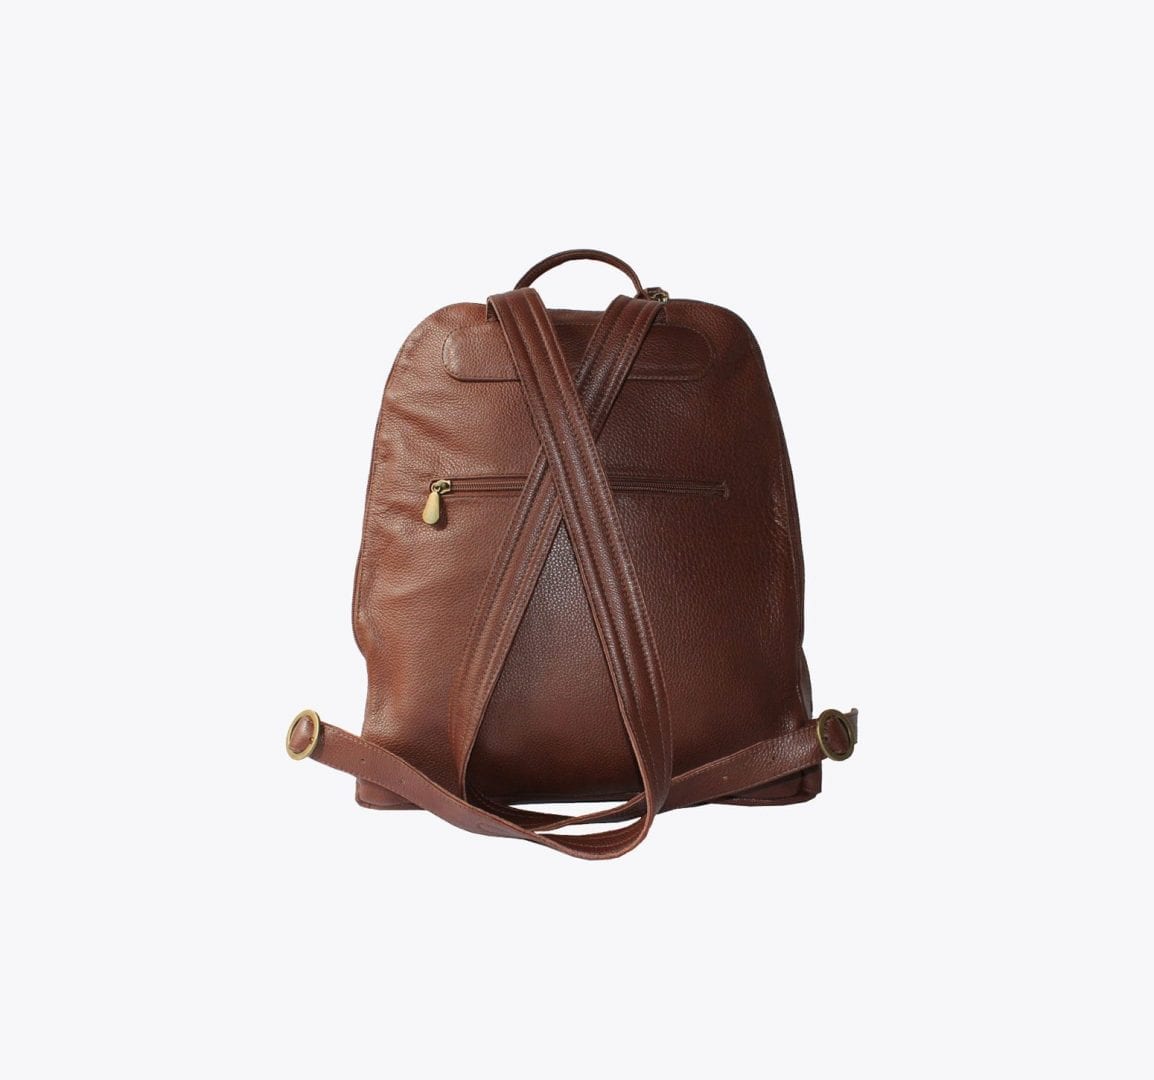 Brown Leather Backpack with Studs